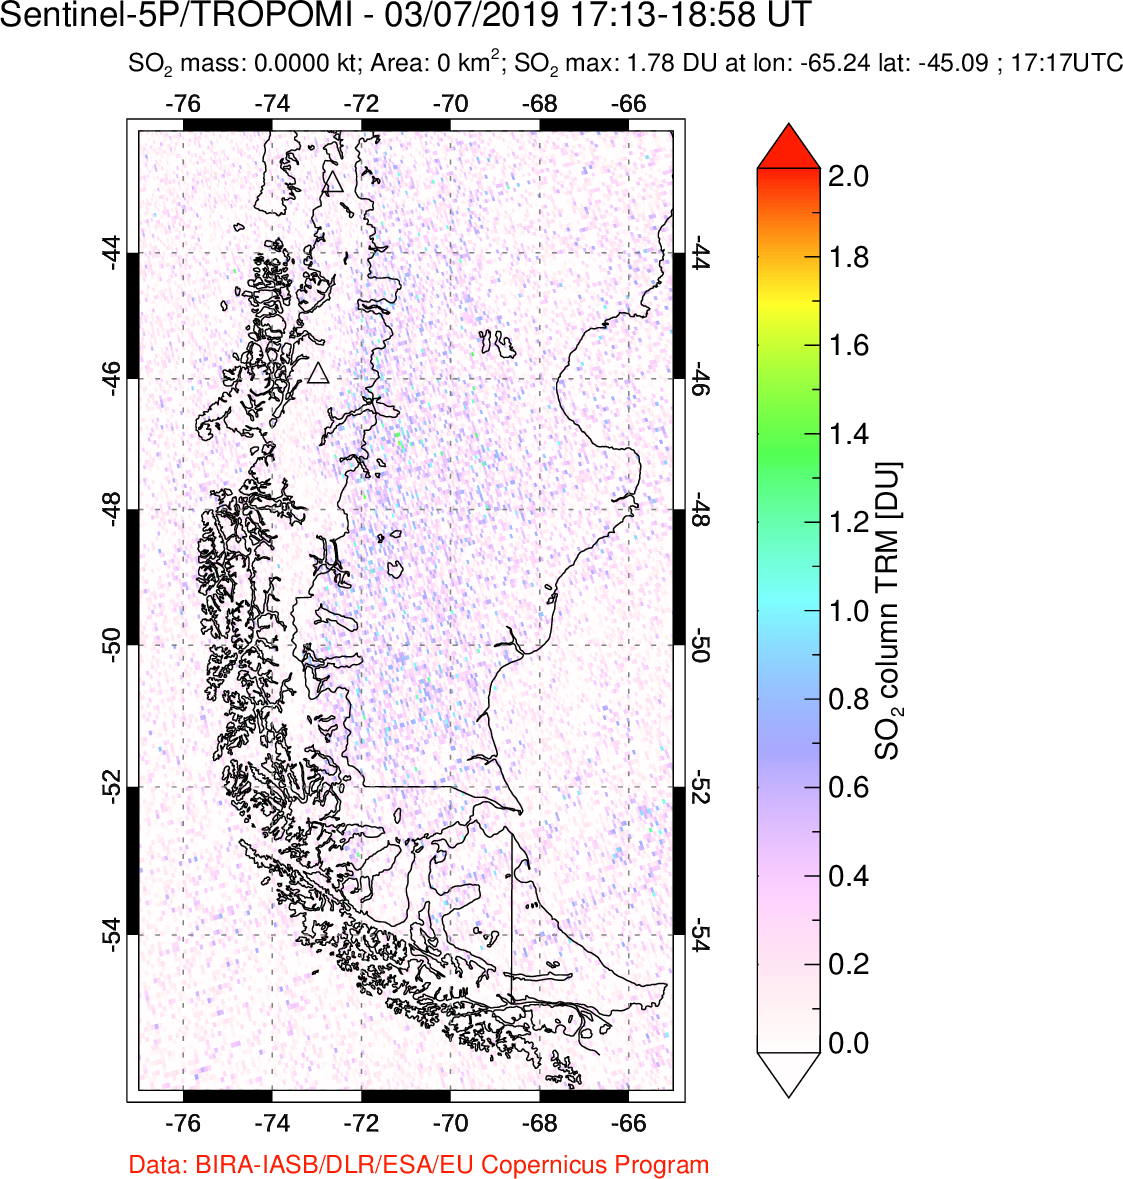 A sulfur dioxide image over Southern Chile on Mar 07, 2019.